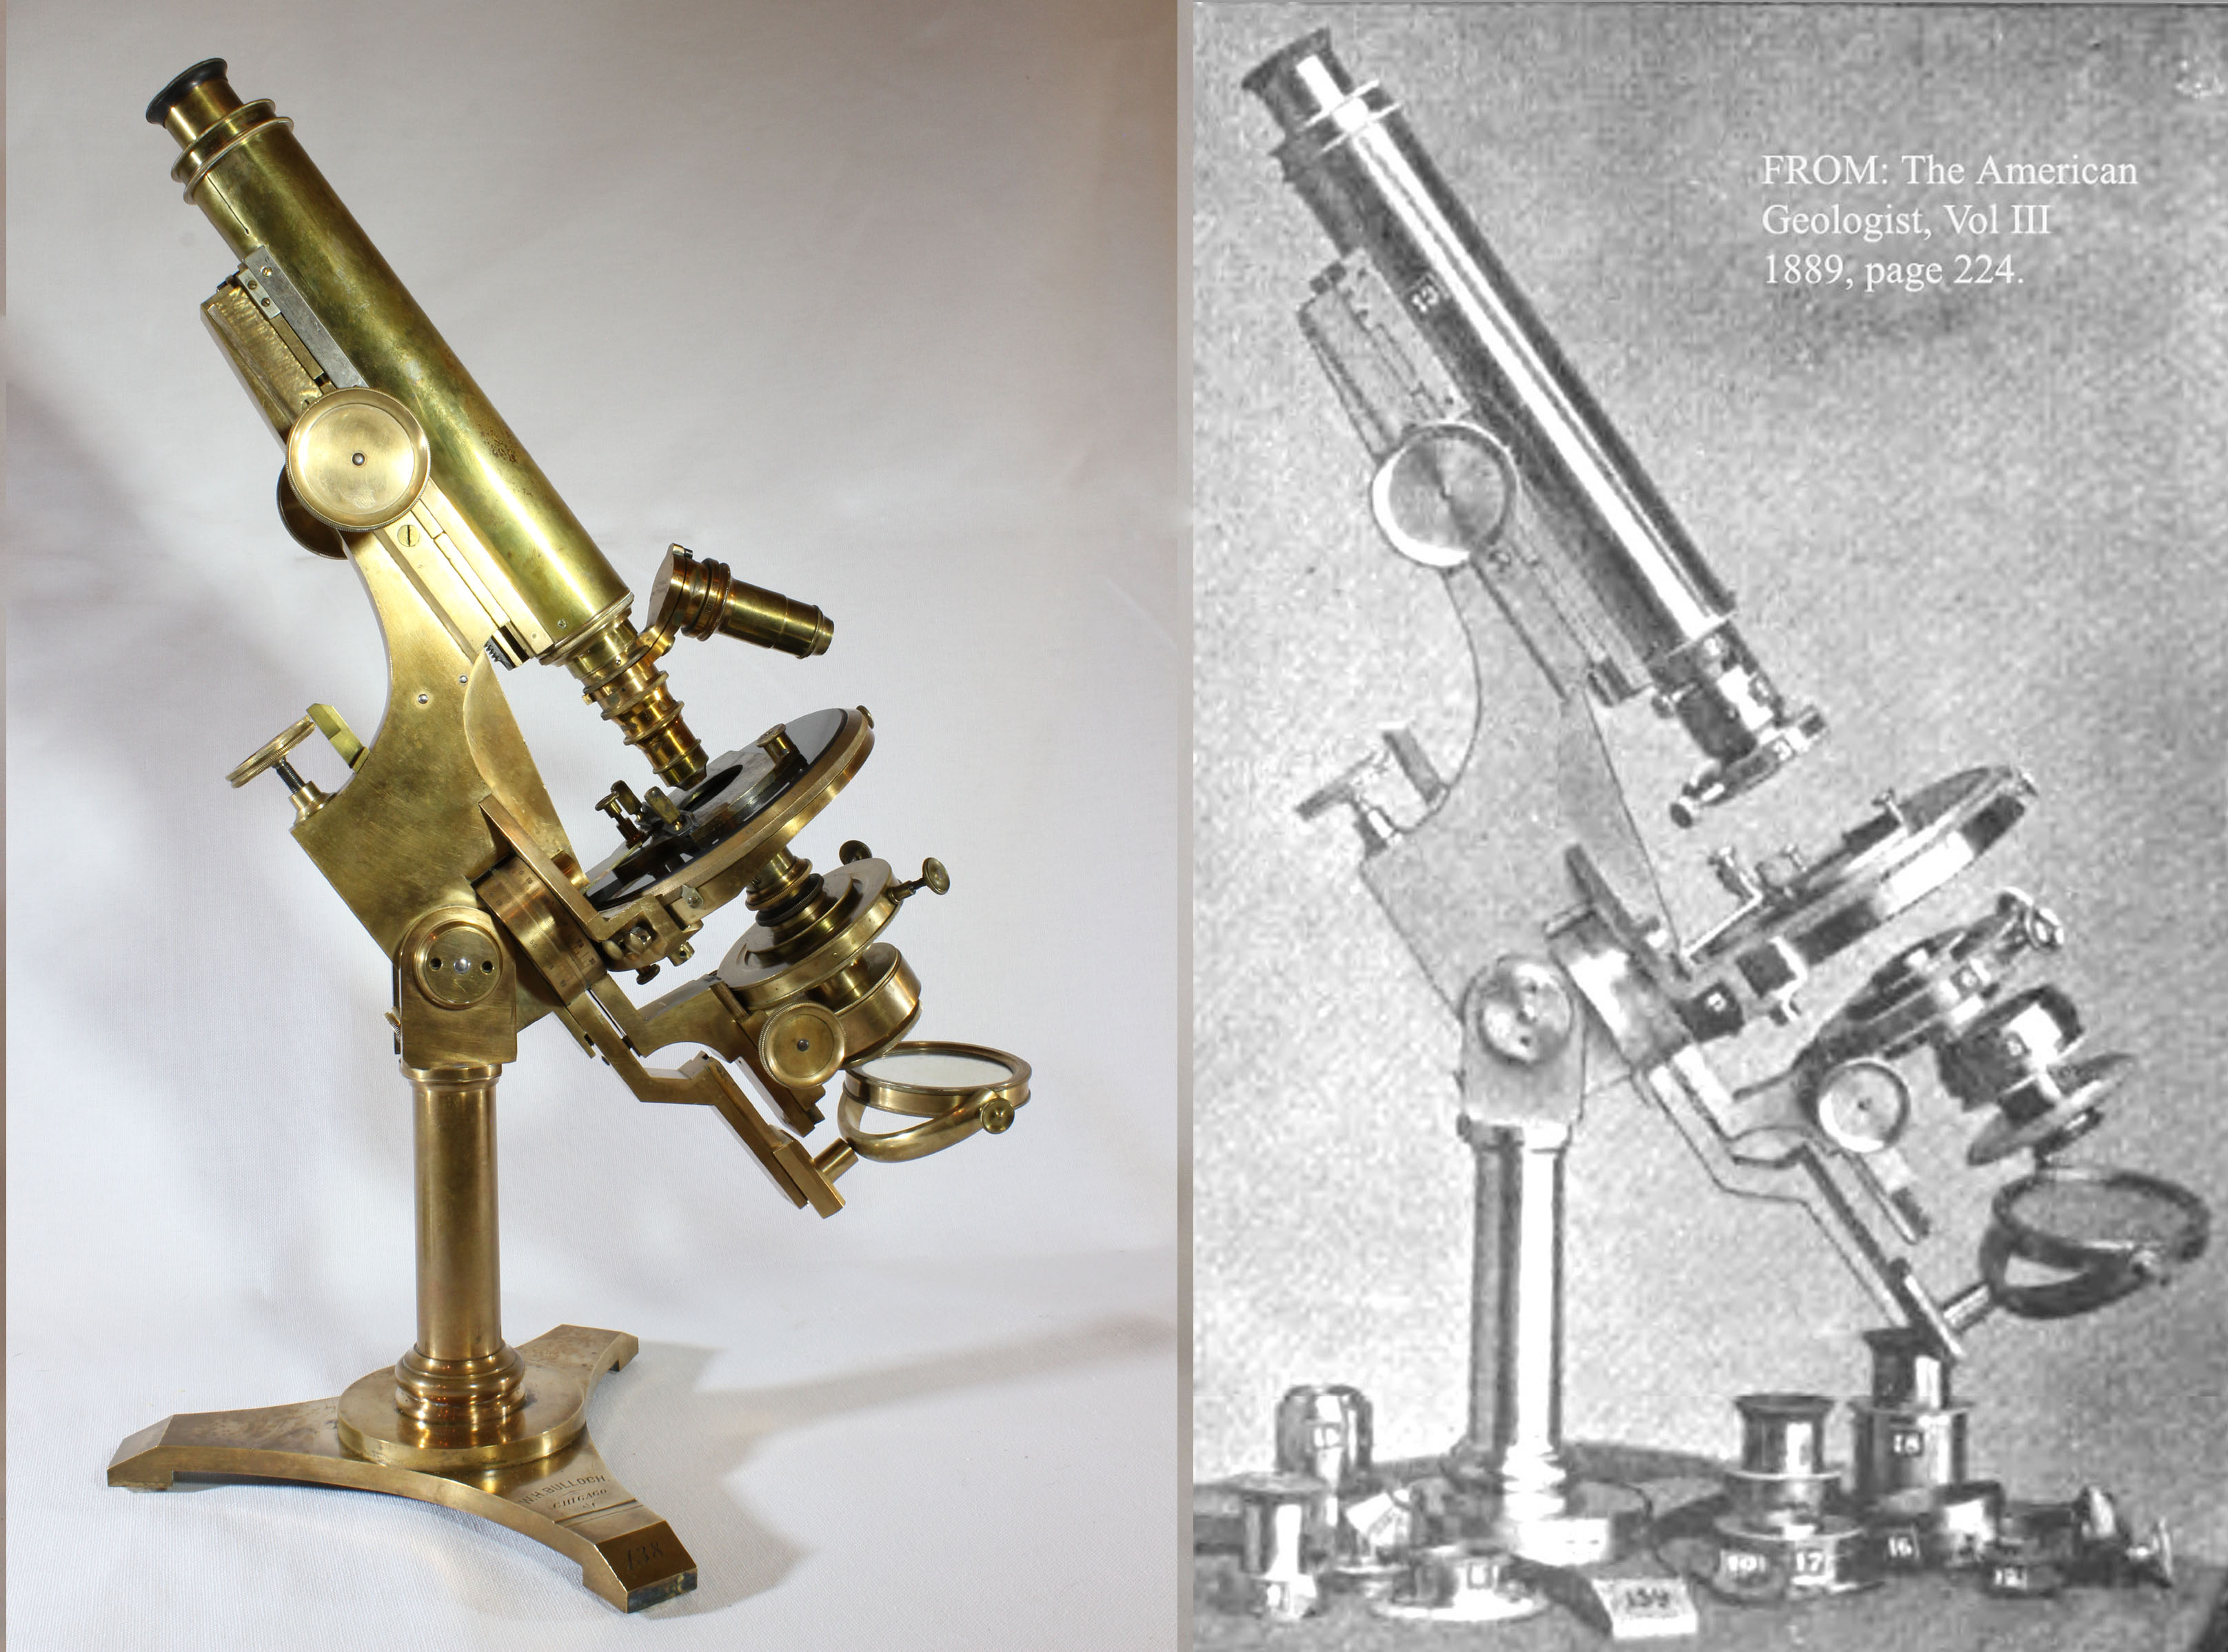 Bulloch Professional Microscope Next to his first model of Lithological